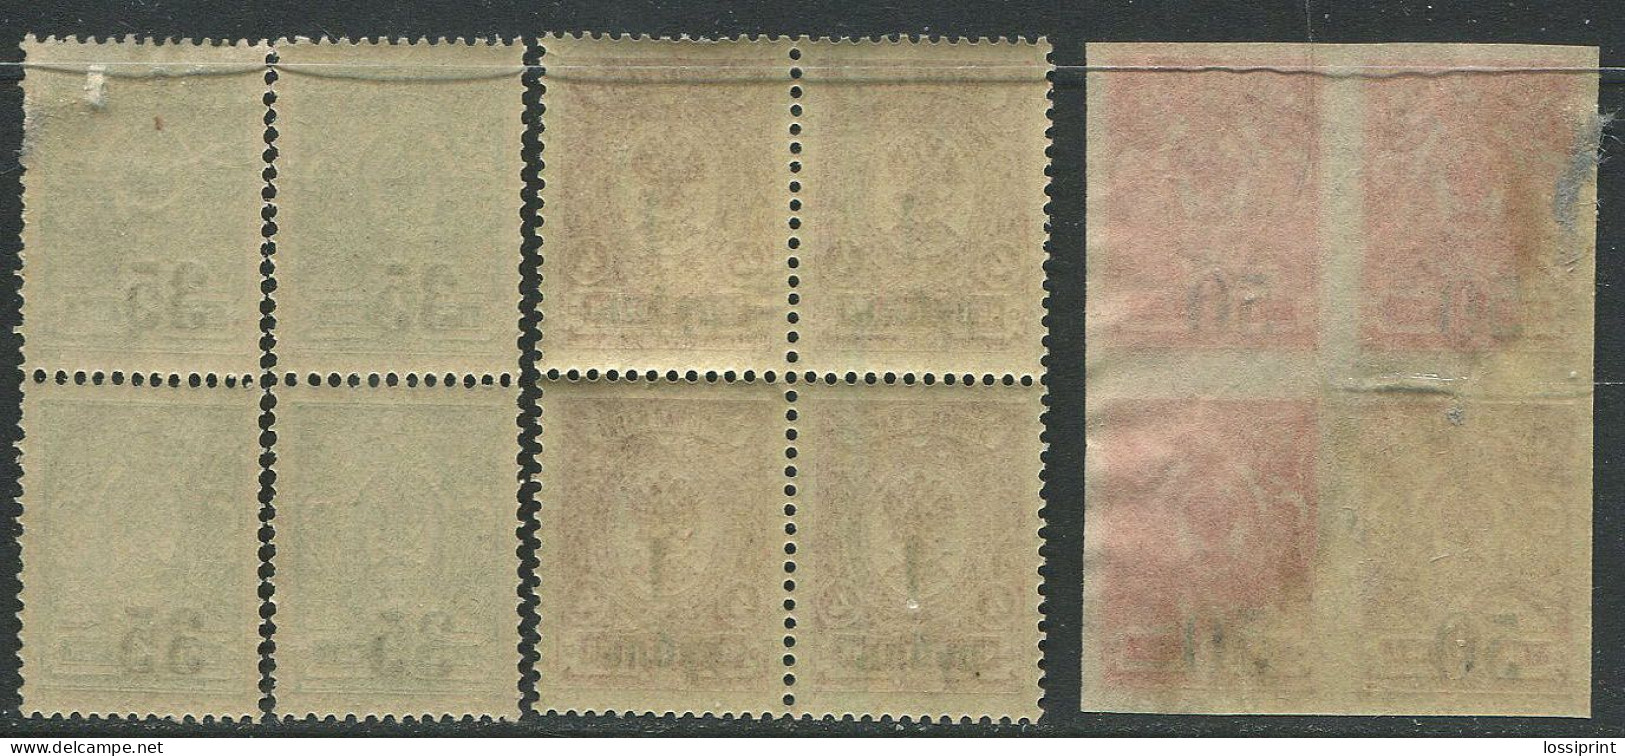 Russia:Unused Overprinted Koltschak Army Stamps 1919/1920 X4, MNH - Siberia And Far East